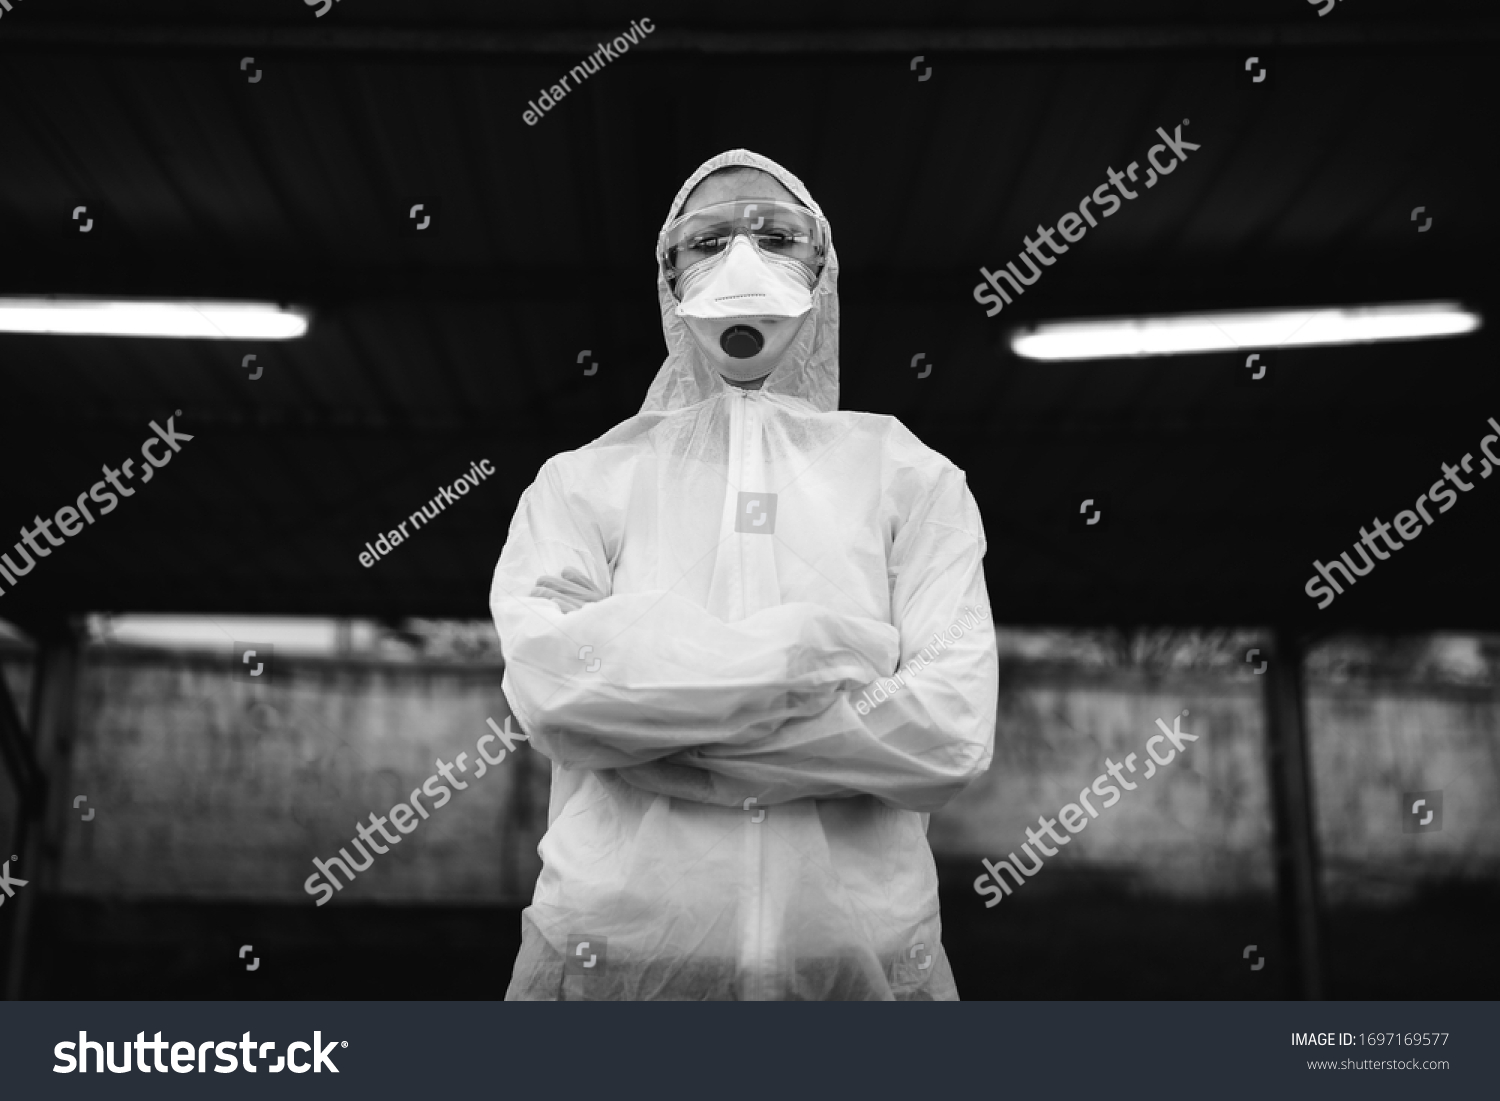 COVID-19 coronavirus doctor in hazmat suit.Infectious disease pandemic medical worker.Female physician in uniform on frontline,fighting viral outbreak.Protective suit with N95 mask. #1697169577